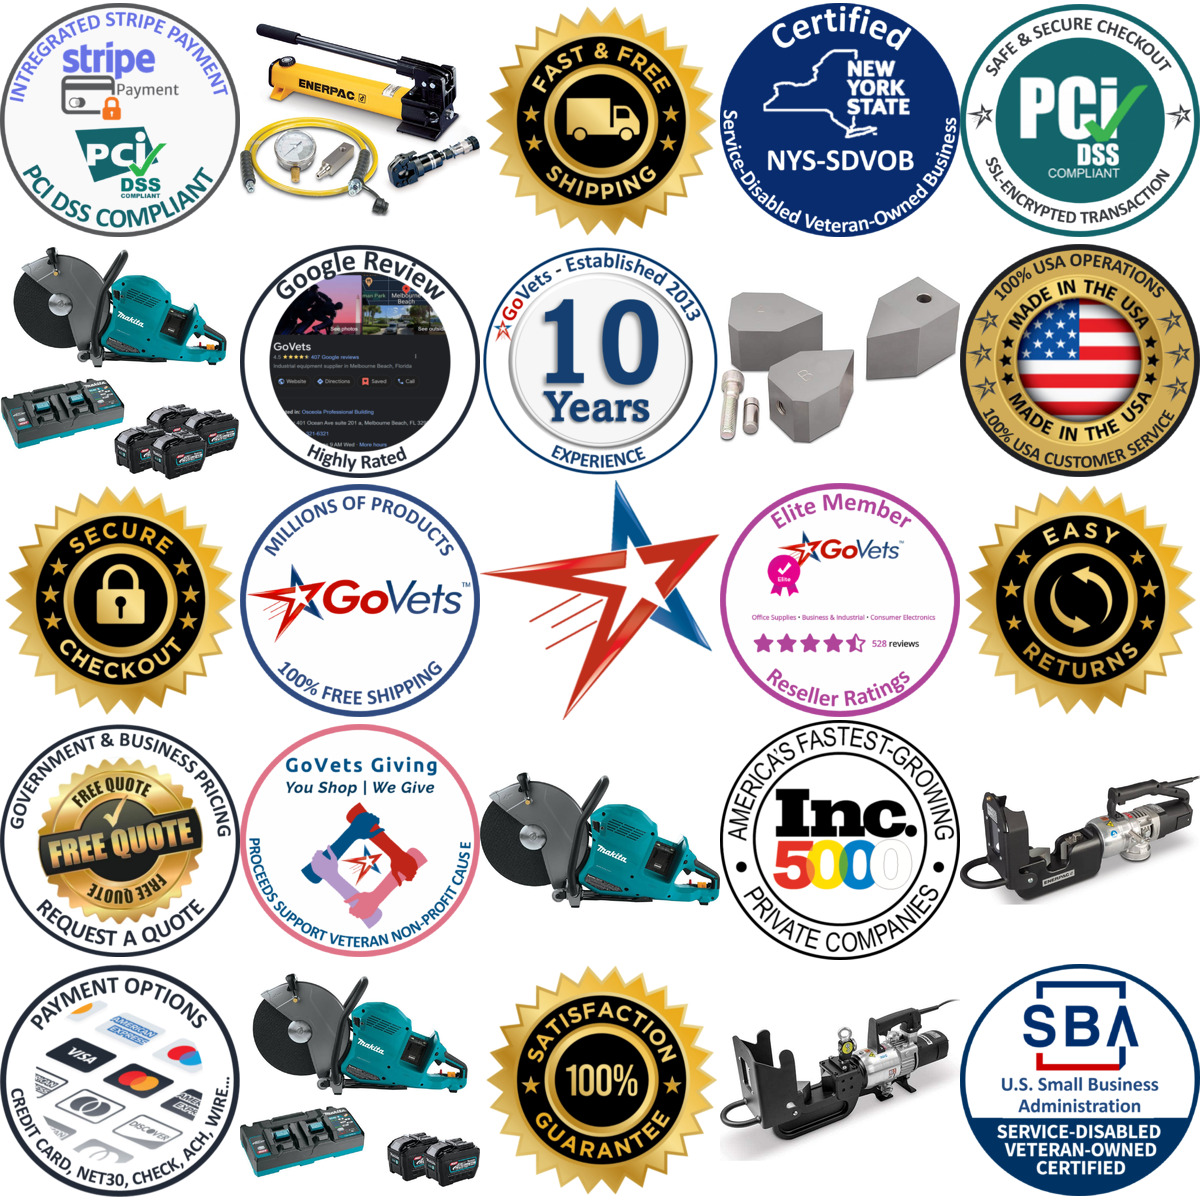 A selection of Power Cutters and Accessories products on GoVets